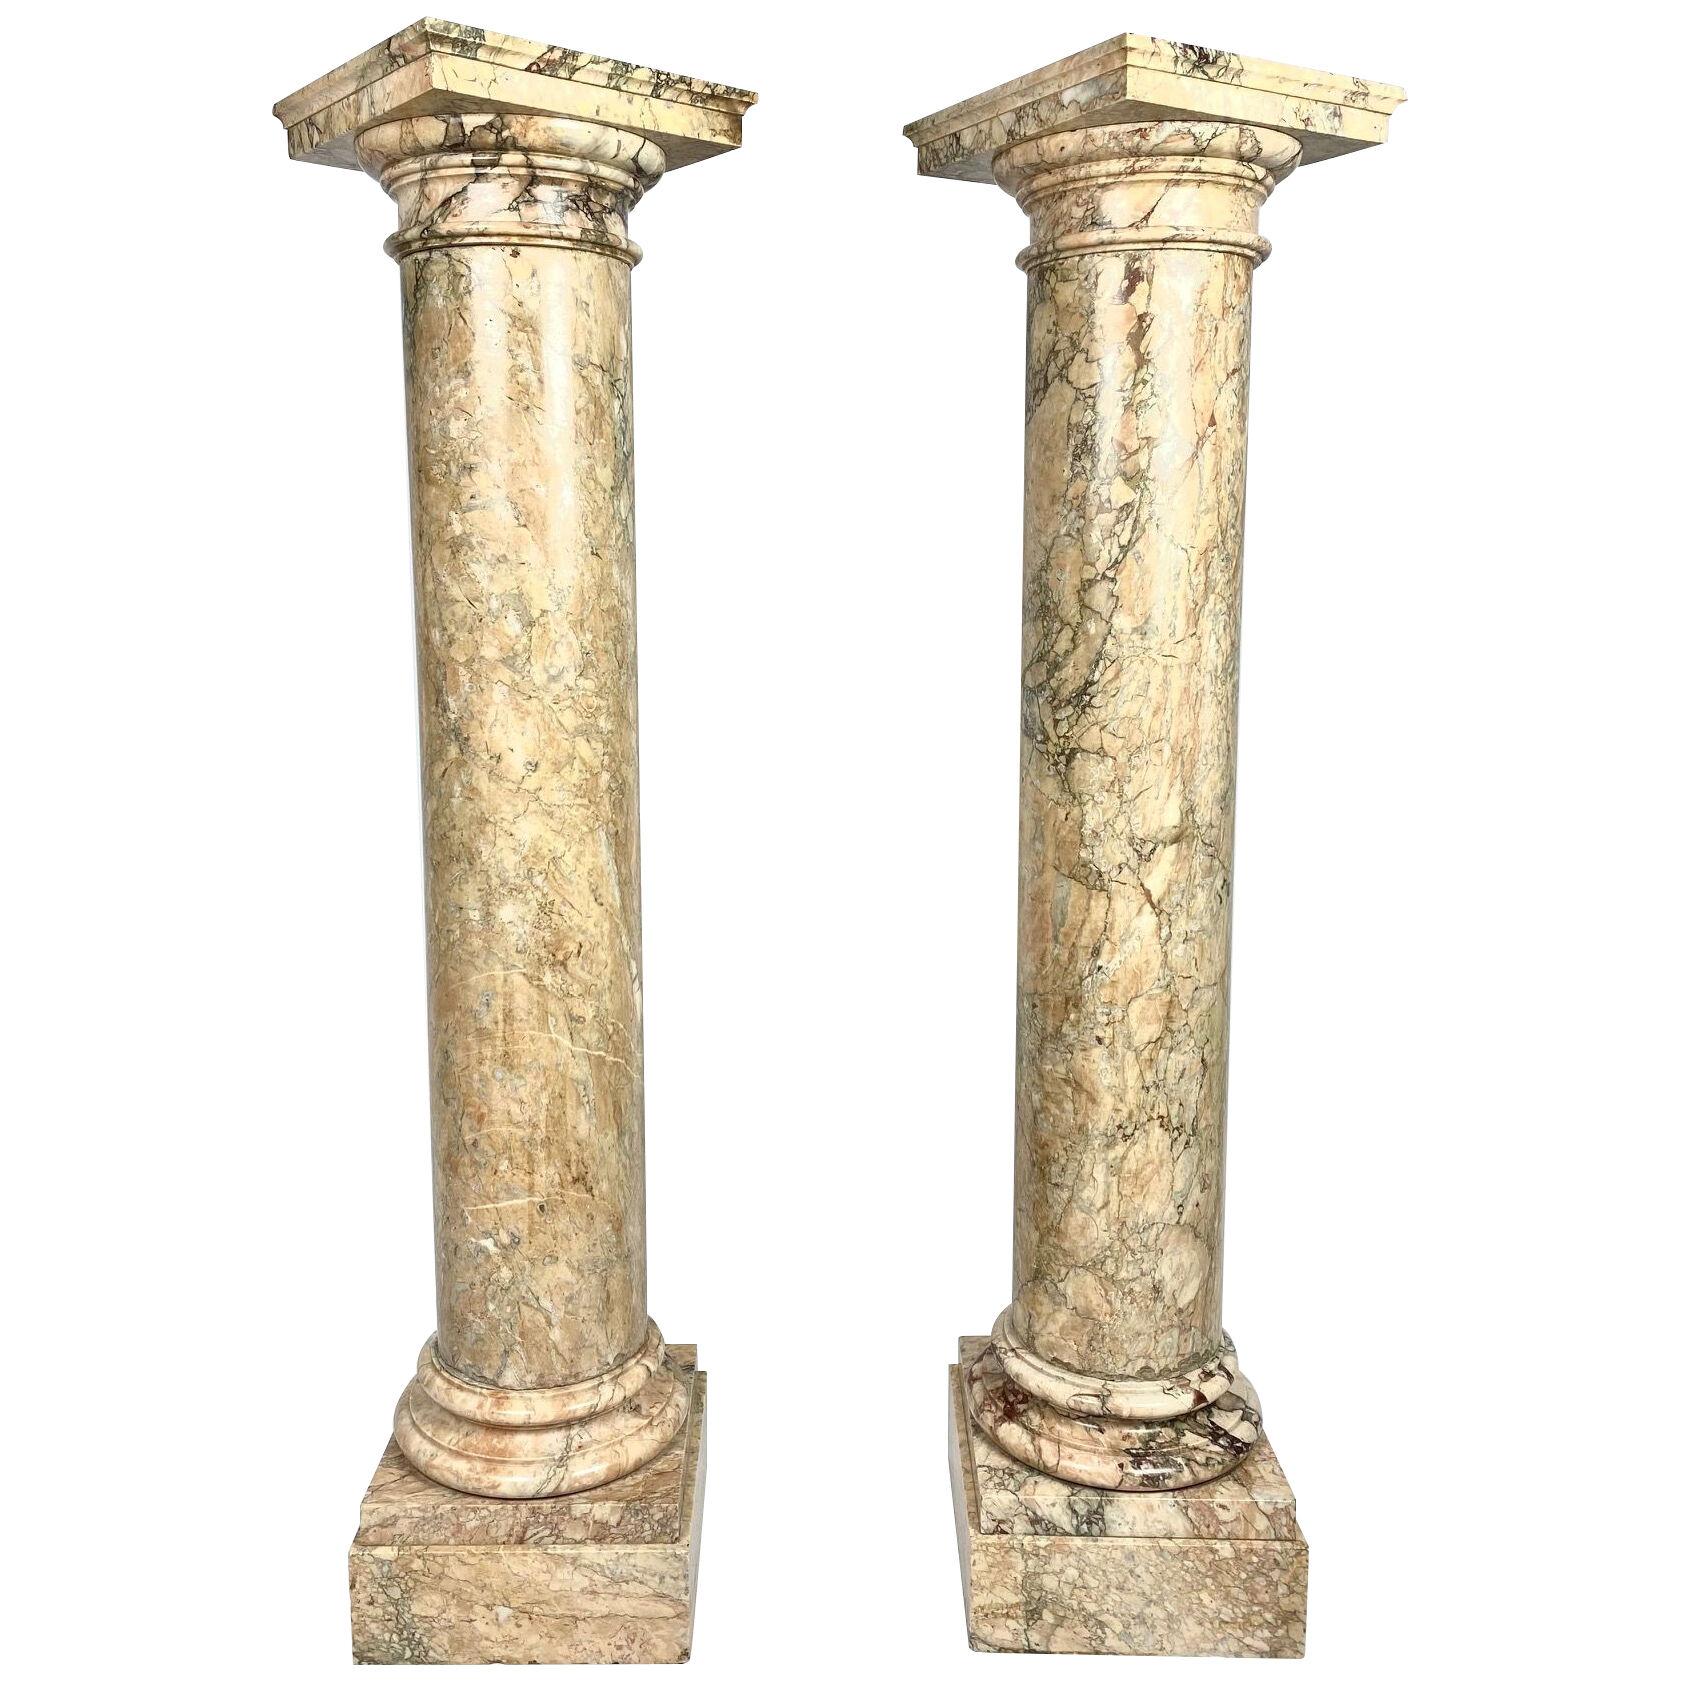 Pair of early 20thC. breccia marble revolving topped pedestals